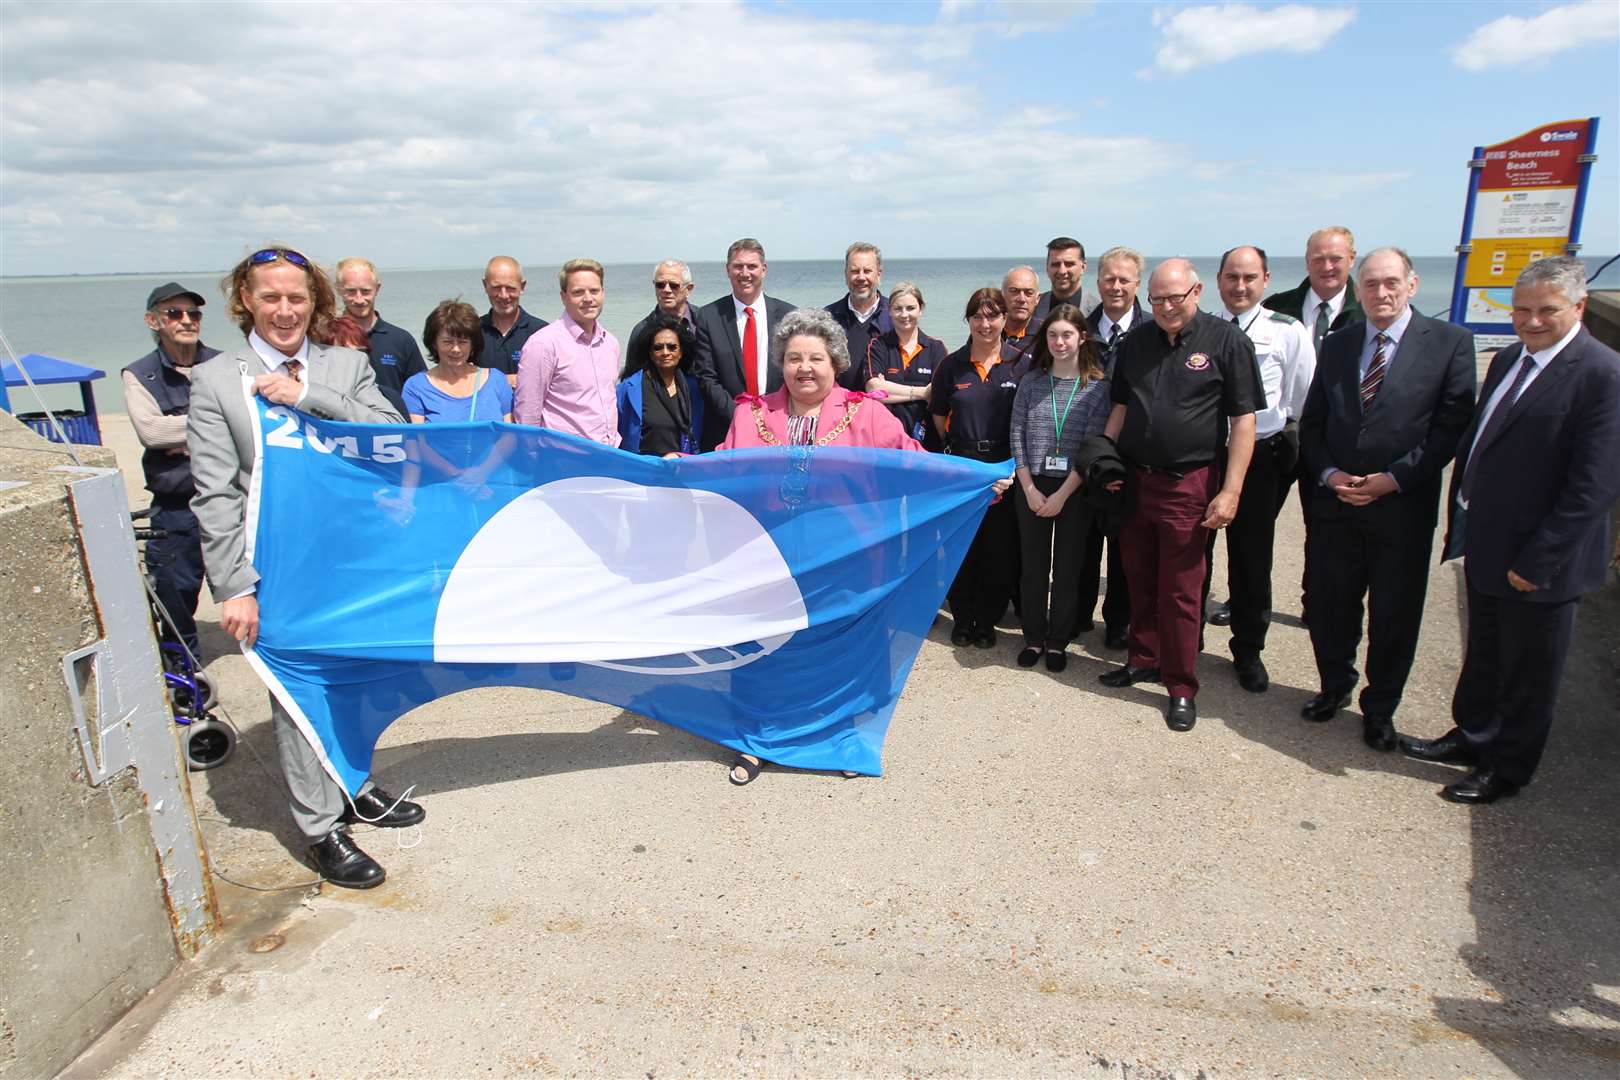 From left, Ian Arnell, Seafront Officer for Swale Borough Council and The Mayor of Swale Cllr Anita Walker, surrounded by environmental officers, councillors and other local people, hold a blue flag which symbolises a clean beach at the start of summer